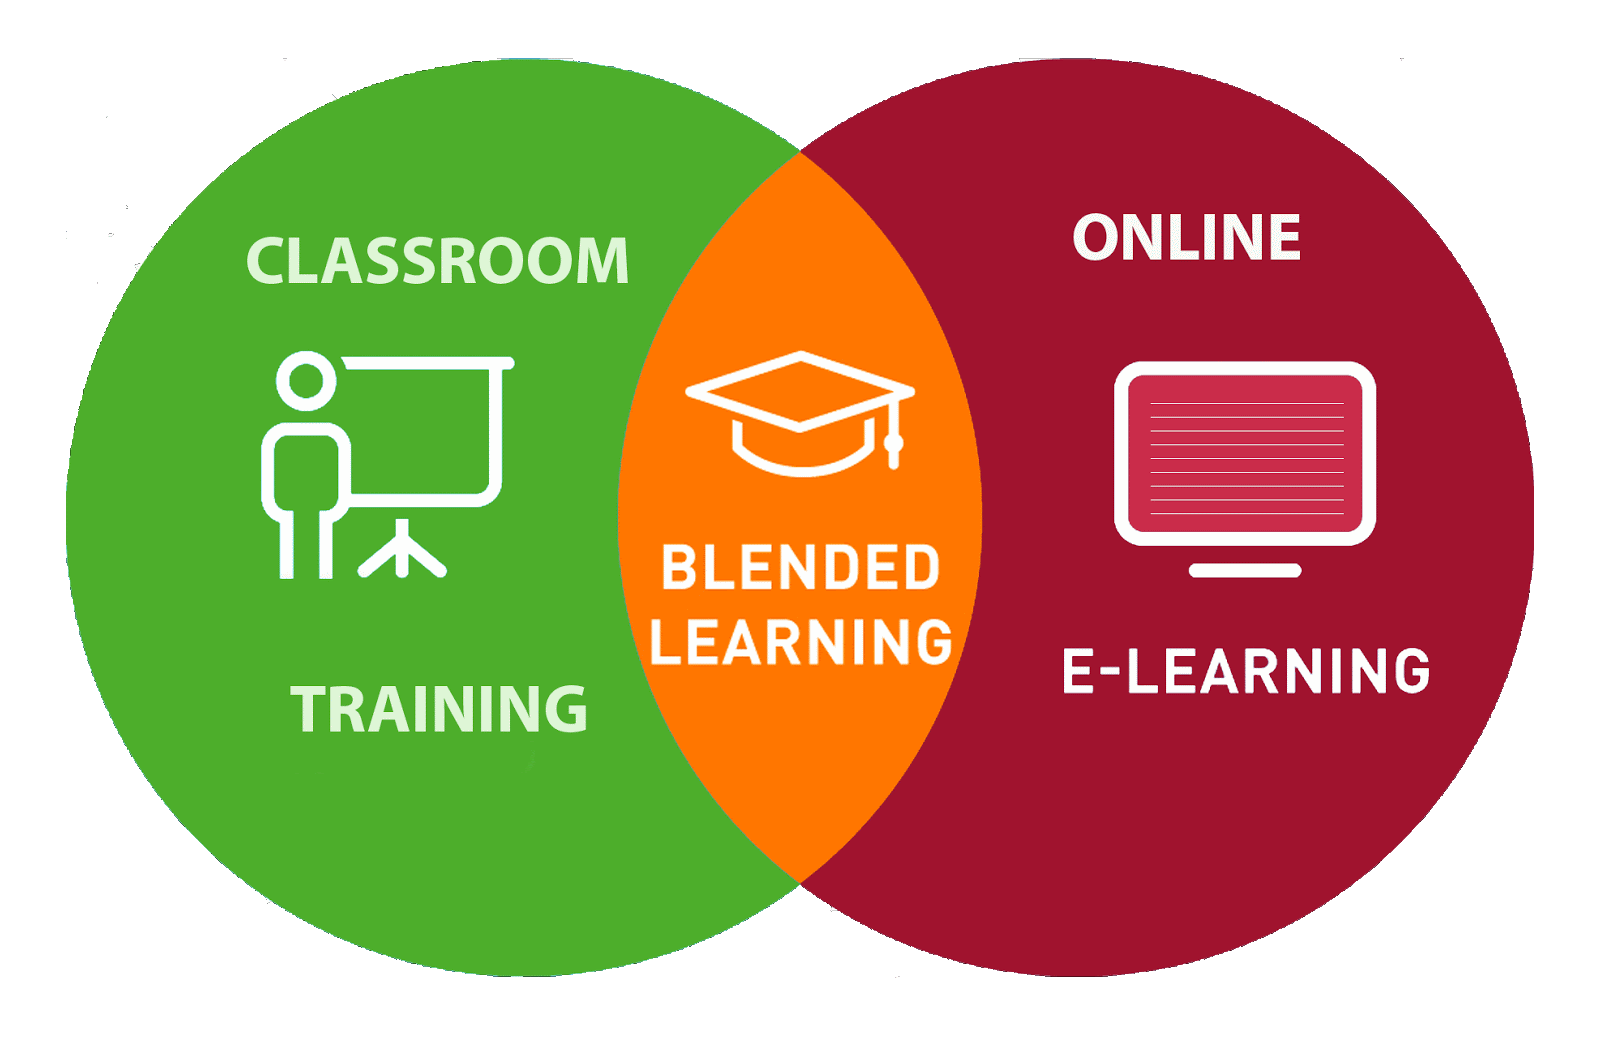 Venn diagram with classroom and training on the left, online and e-learning on the right, and blended learning in the middle